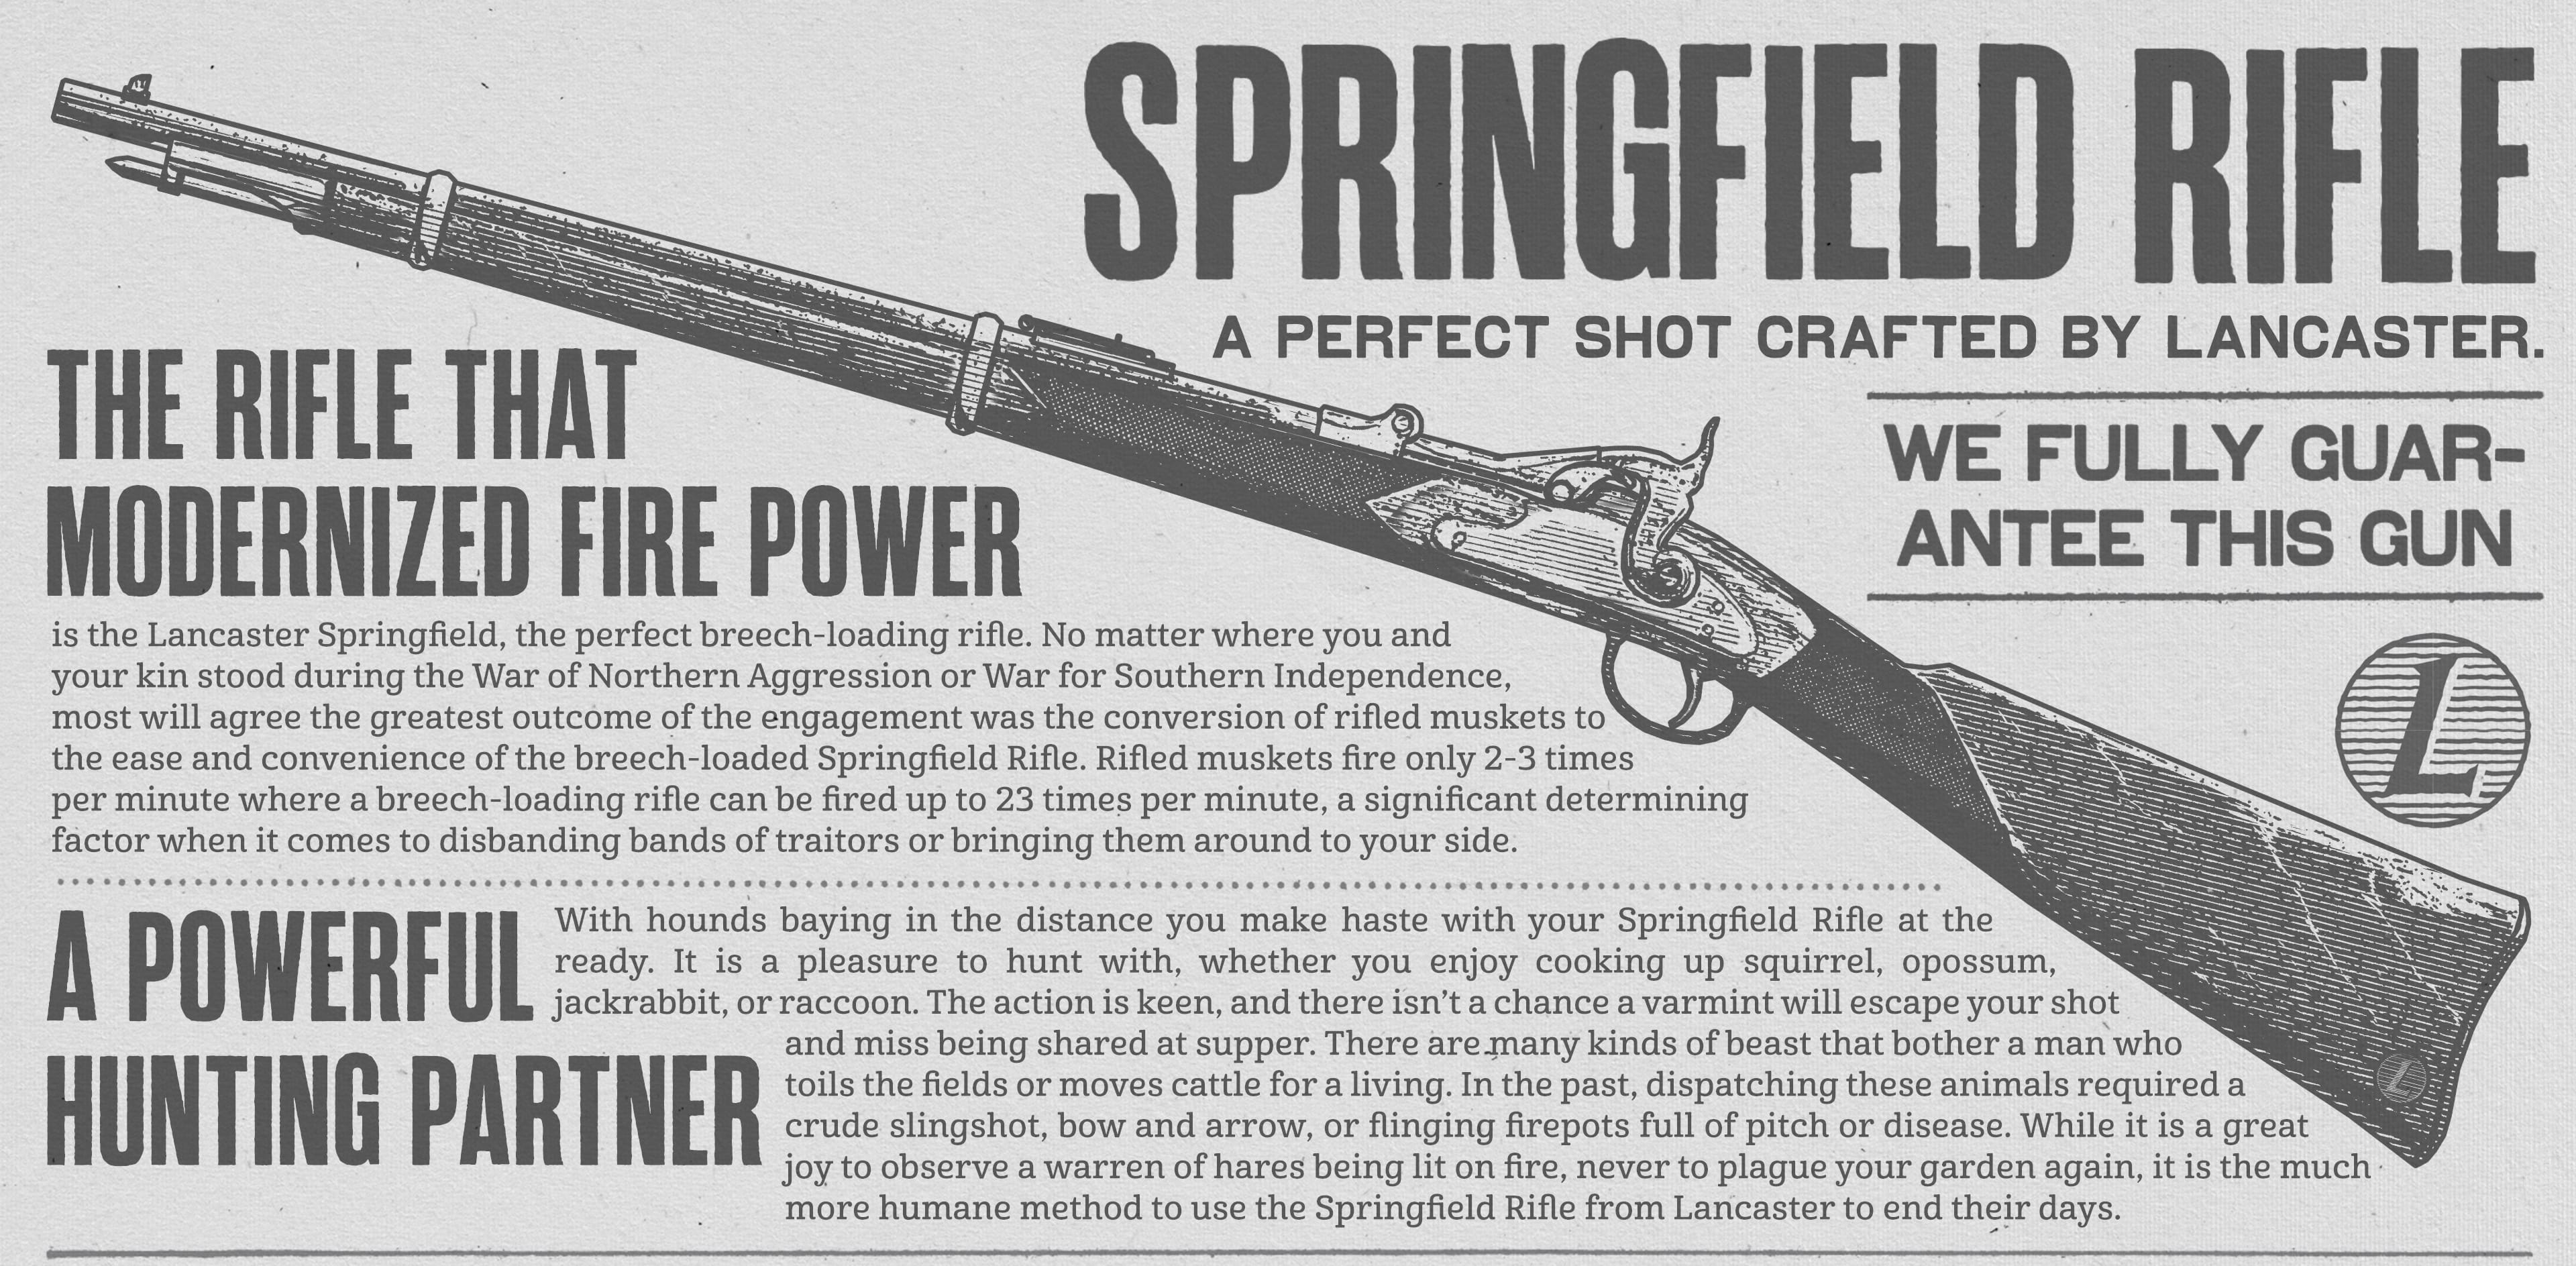 Red Dead Redemption 2 features over unique weapons and a wide-range of customization options VG247